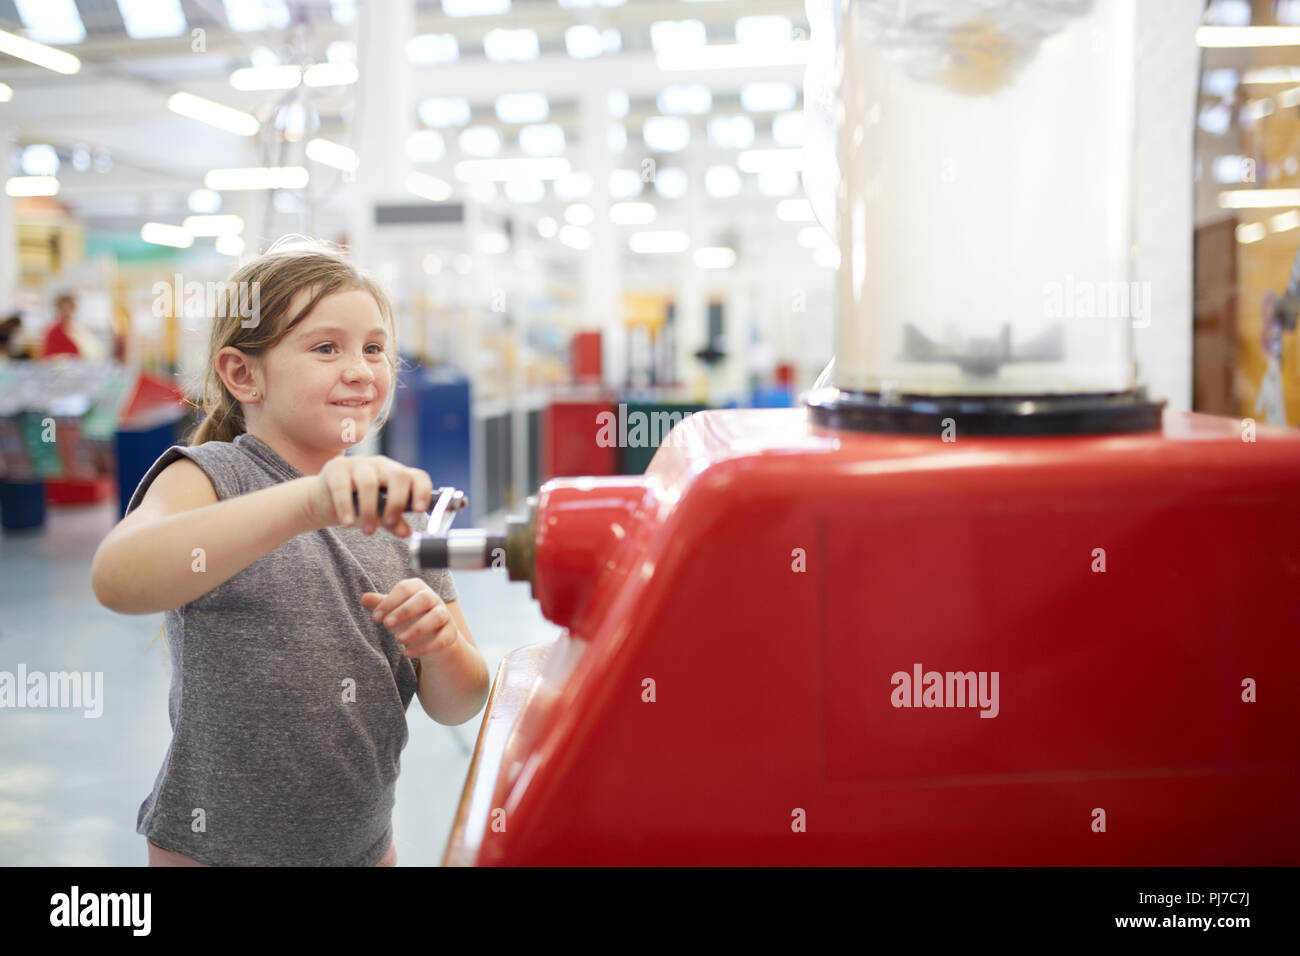 Girl playing with interactive exhibit in science center Stock Photo